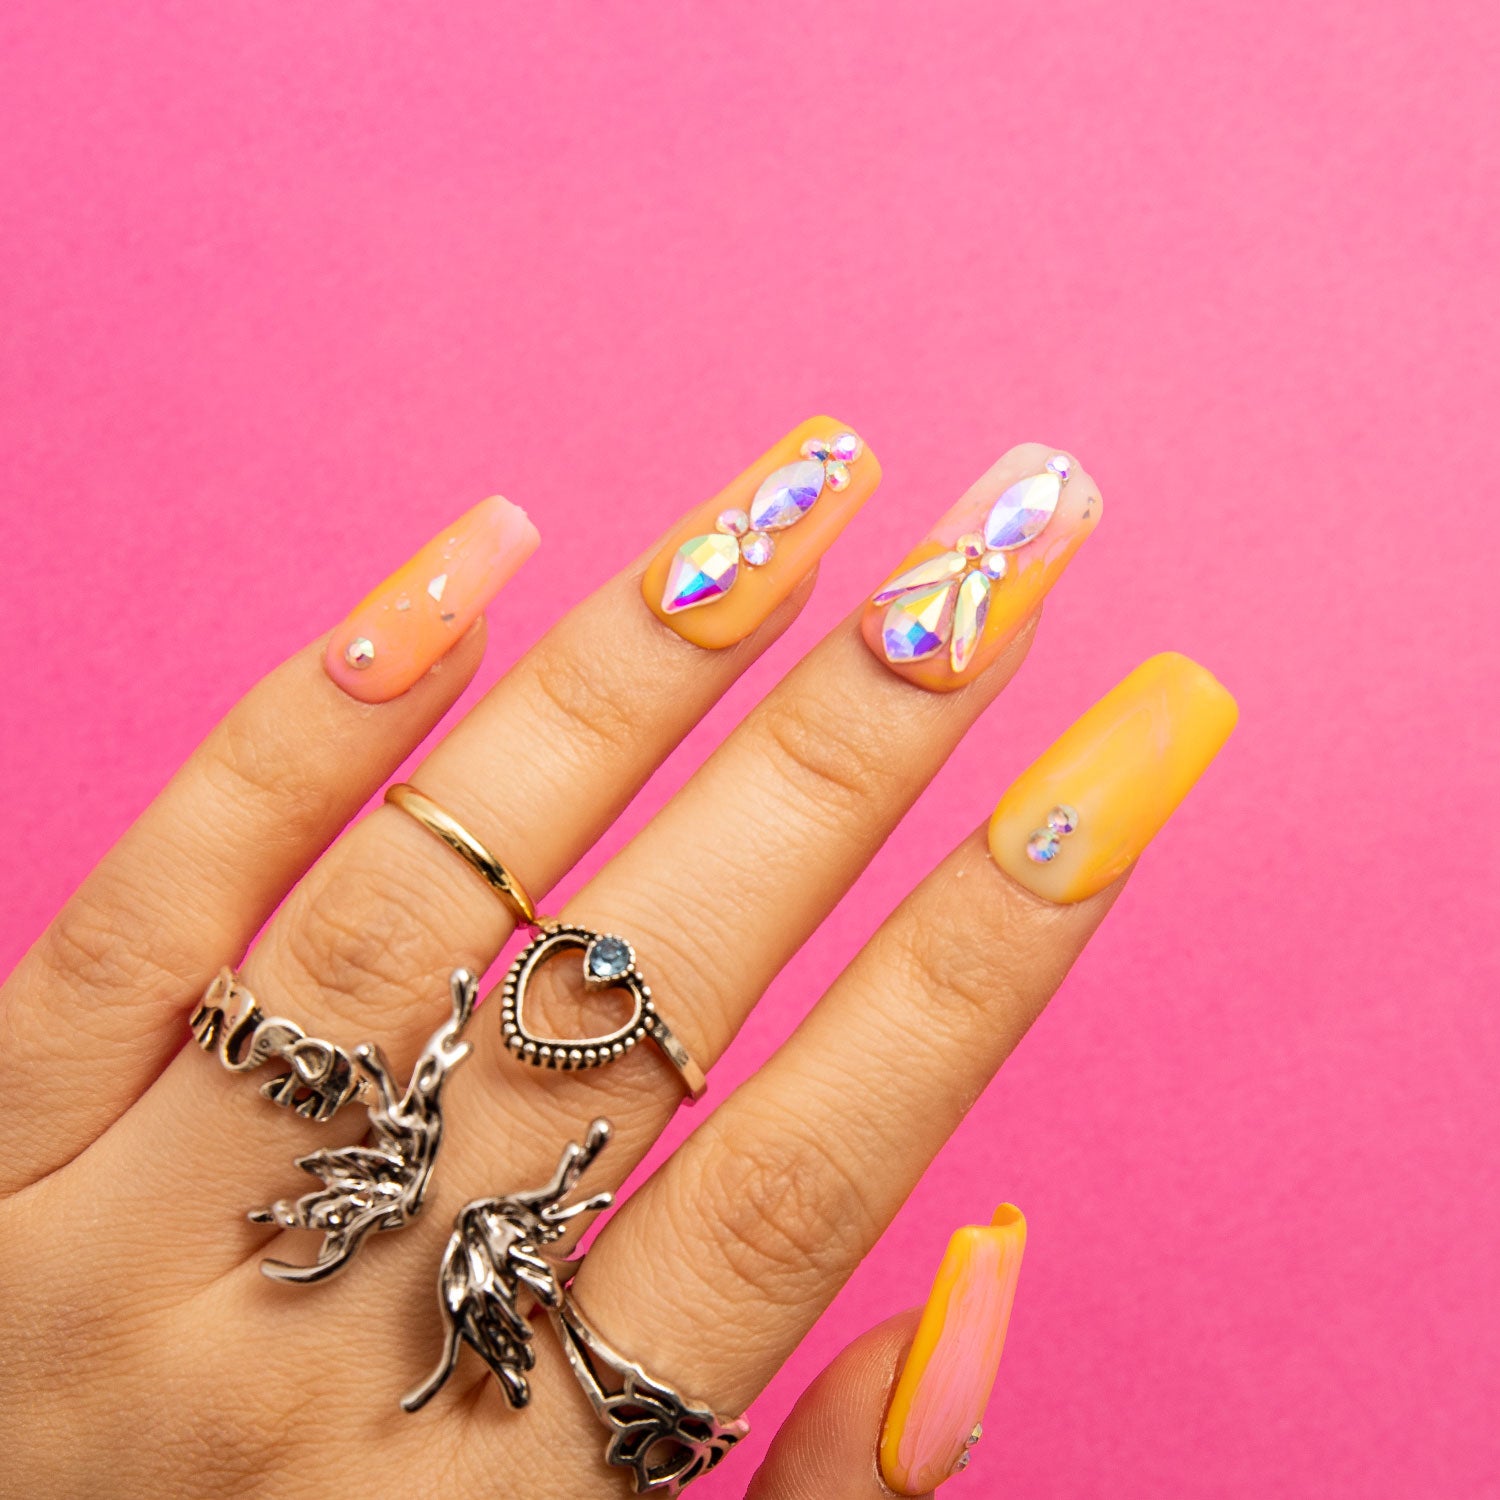 Acrylic nails painted in orange and yellow tones with rhinestone decorations, set against a pink background, and accessorized with silver rings including a heart-shaped ring.